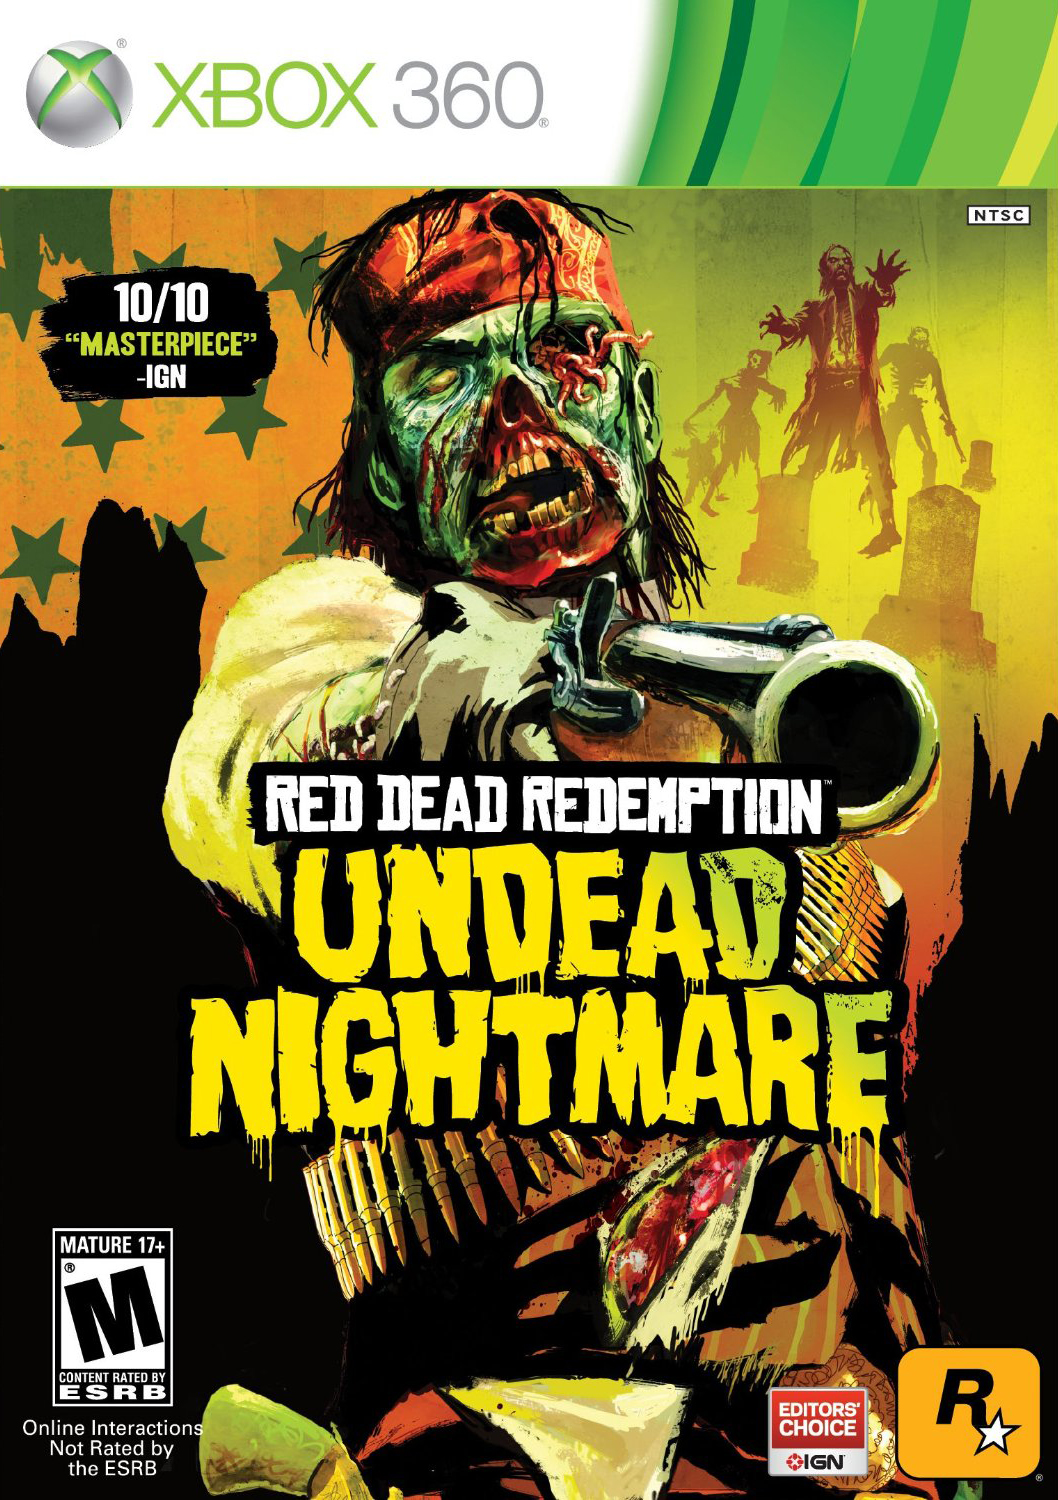 Red Dead Redemption: Undead Nightmare DLC Pack (XBOX 360) - image 1 of 7